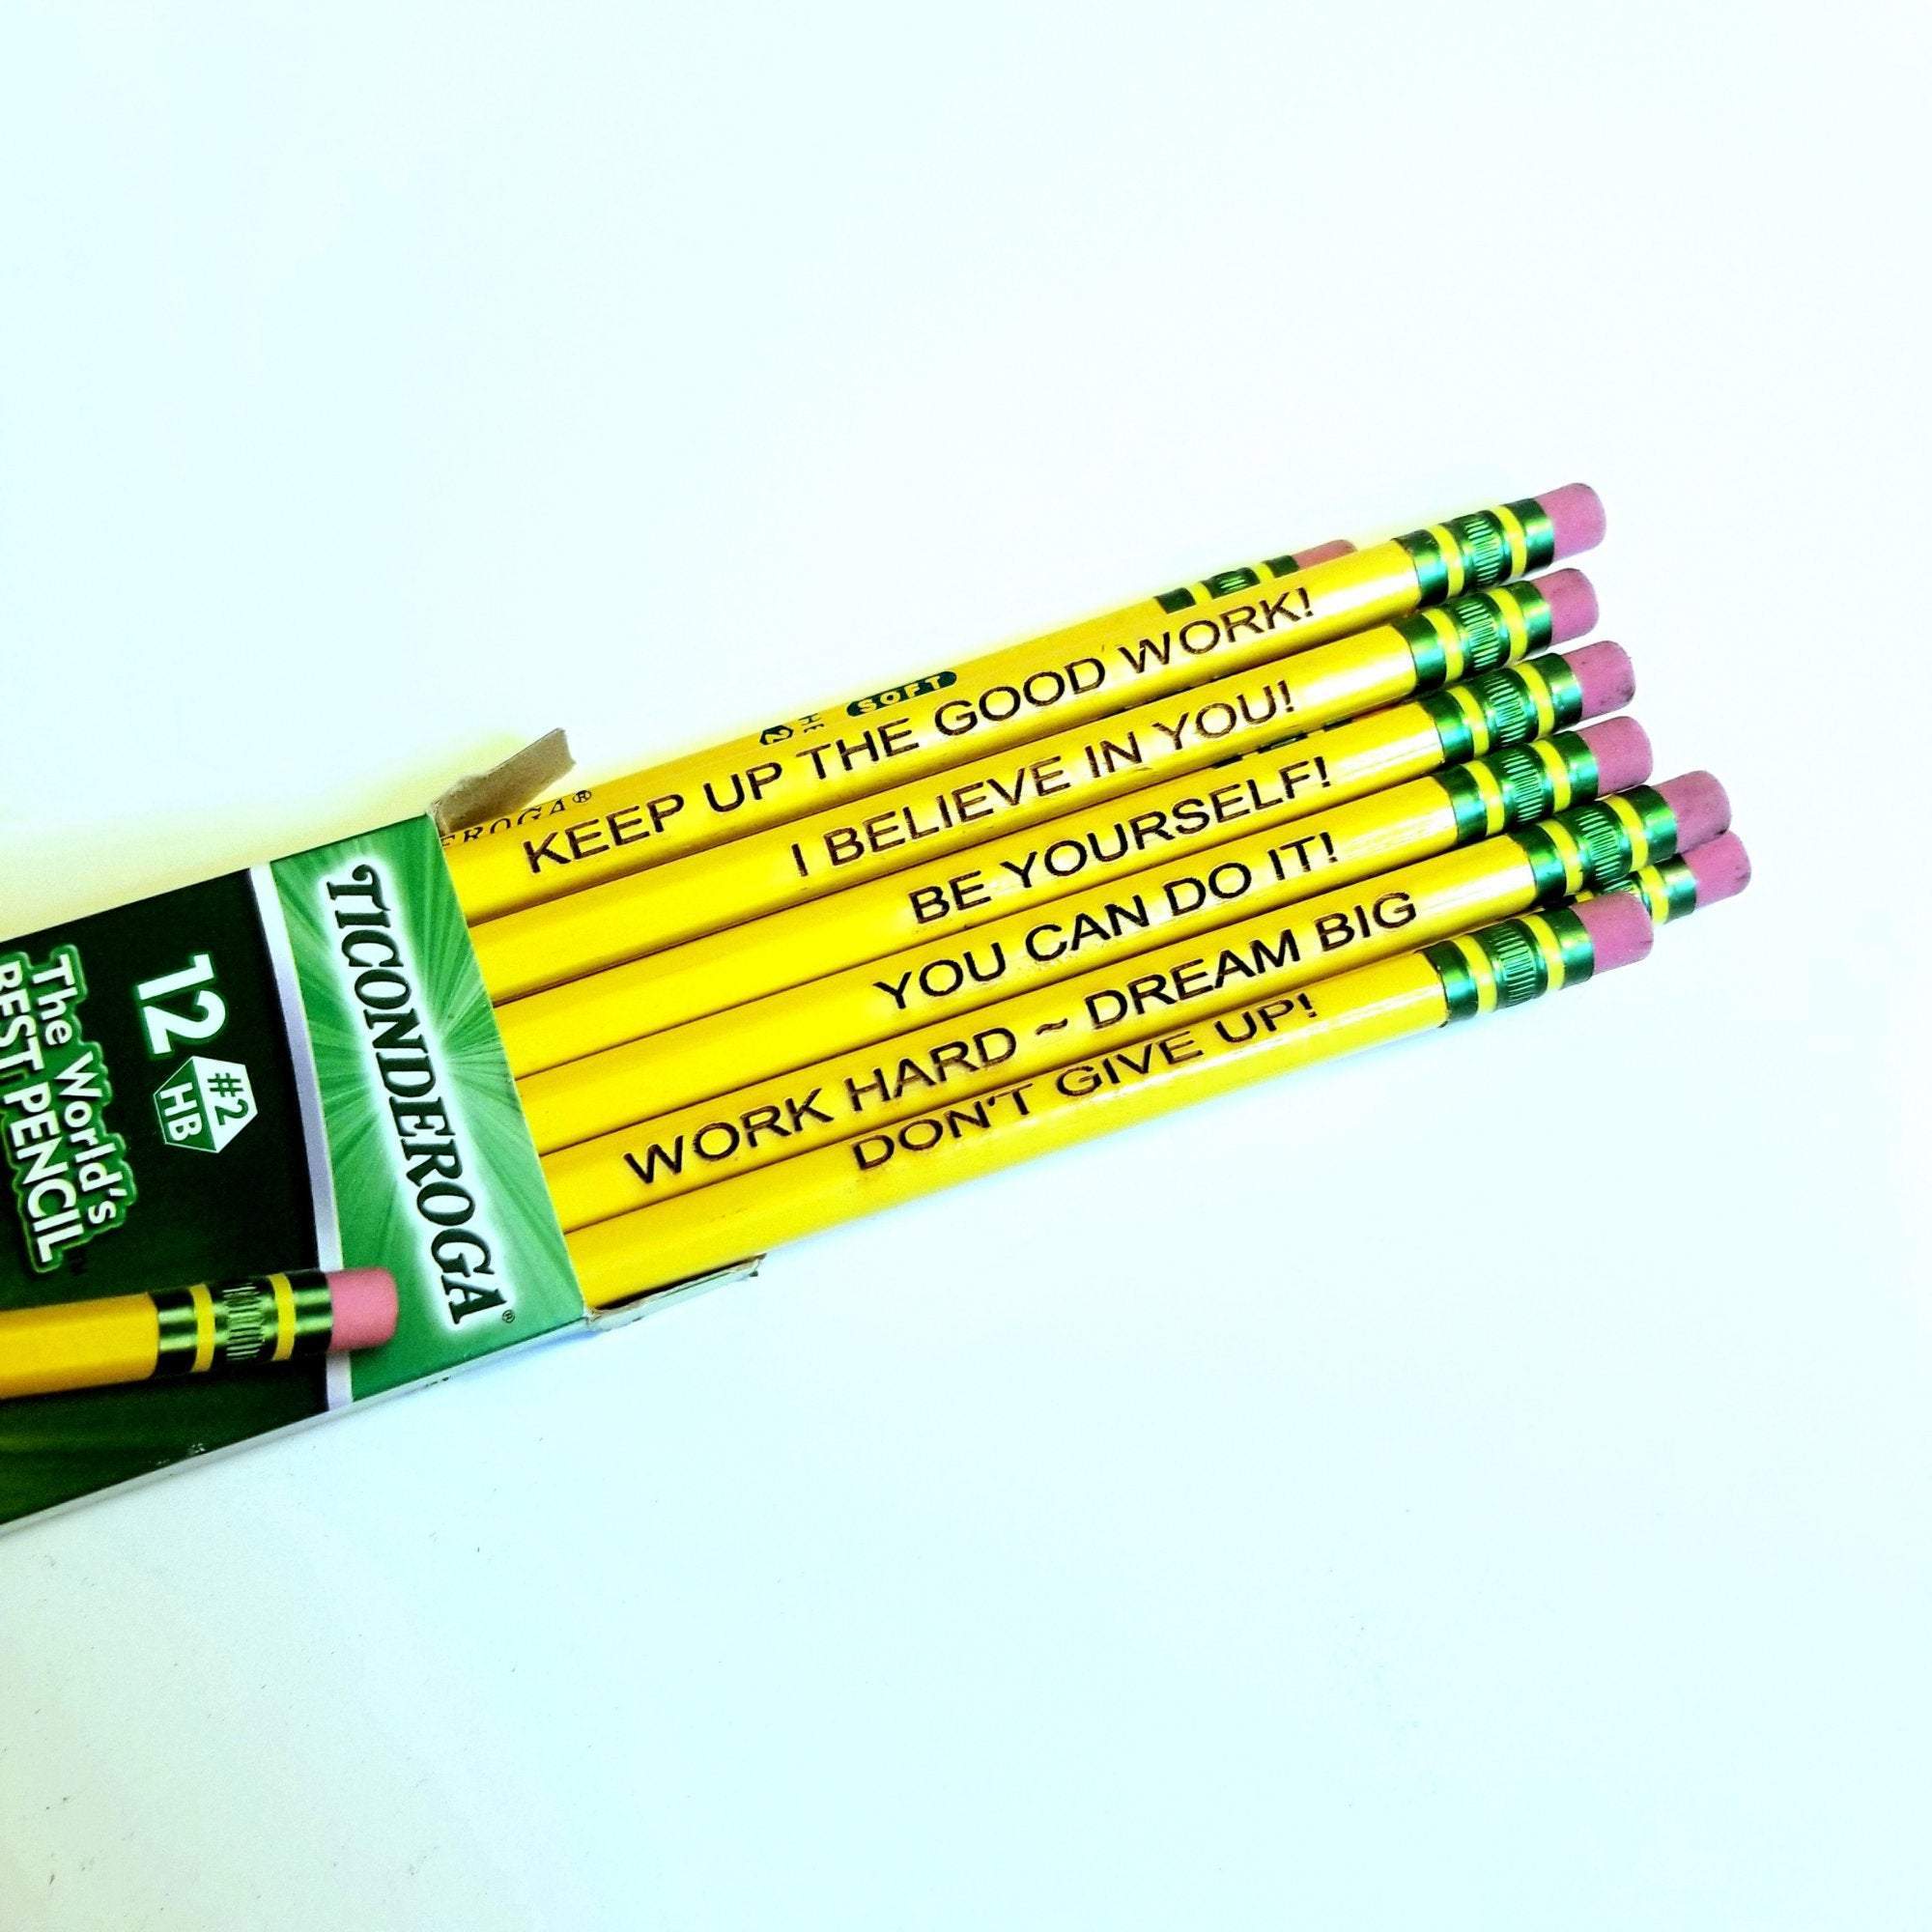 Back to School Personalized Inspirational Saying Pencils for Kids - Designodeal